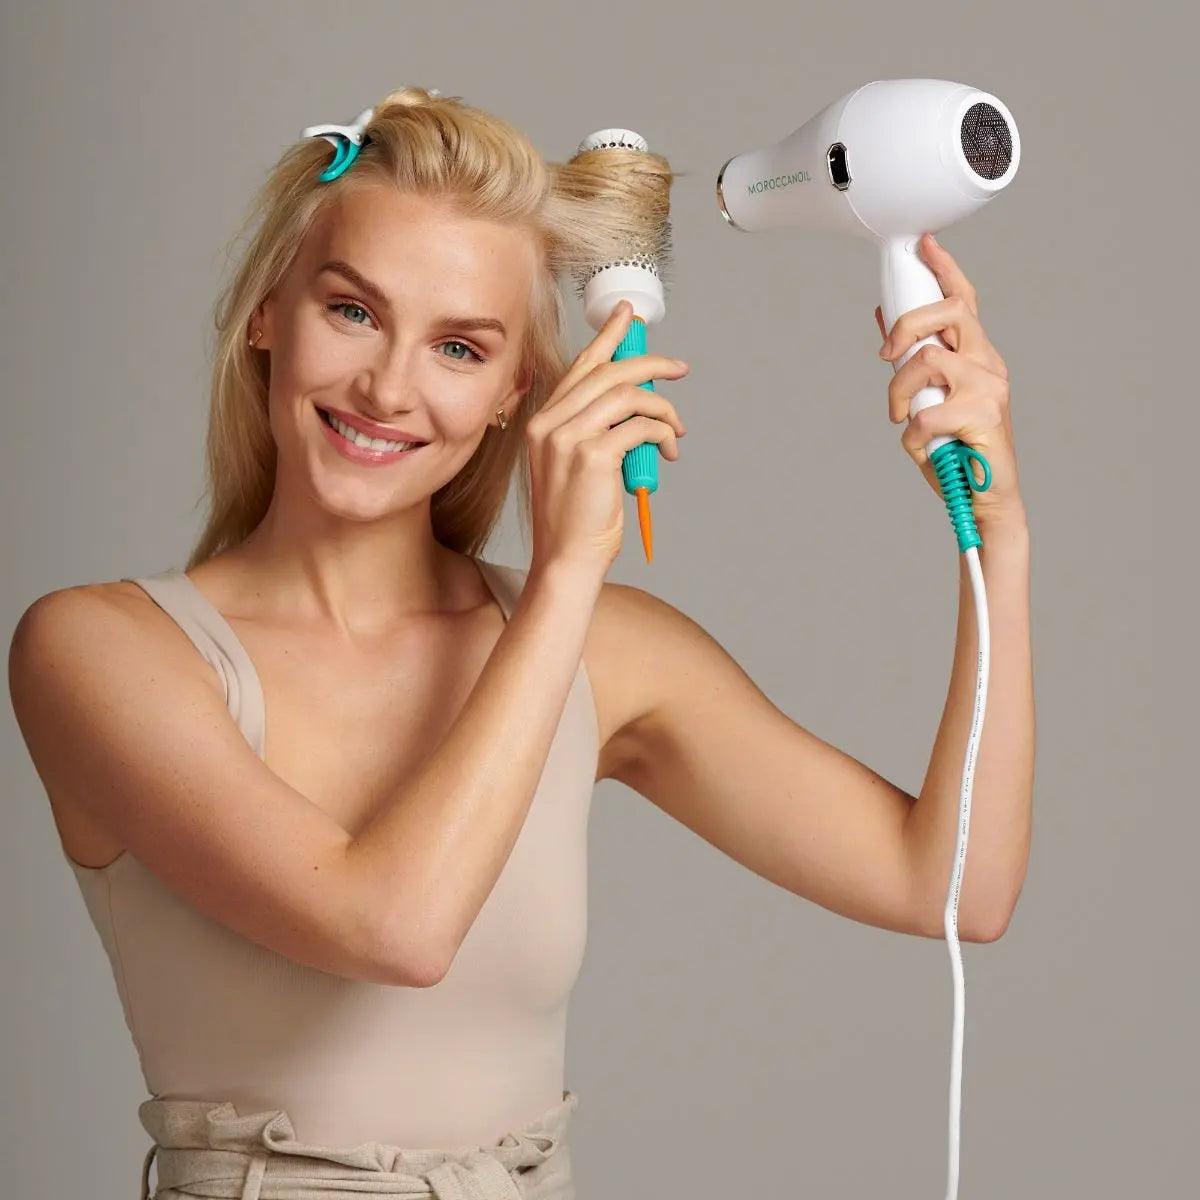 Smart Styling Infrared Hair Dryer Moroccanoil Boutique Deauville